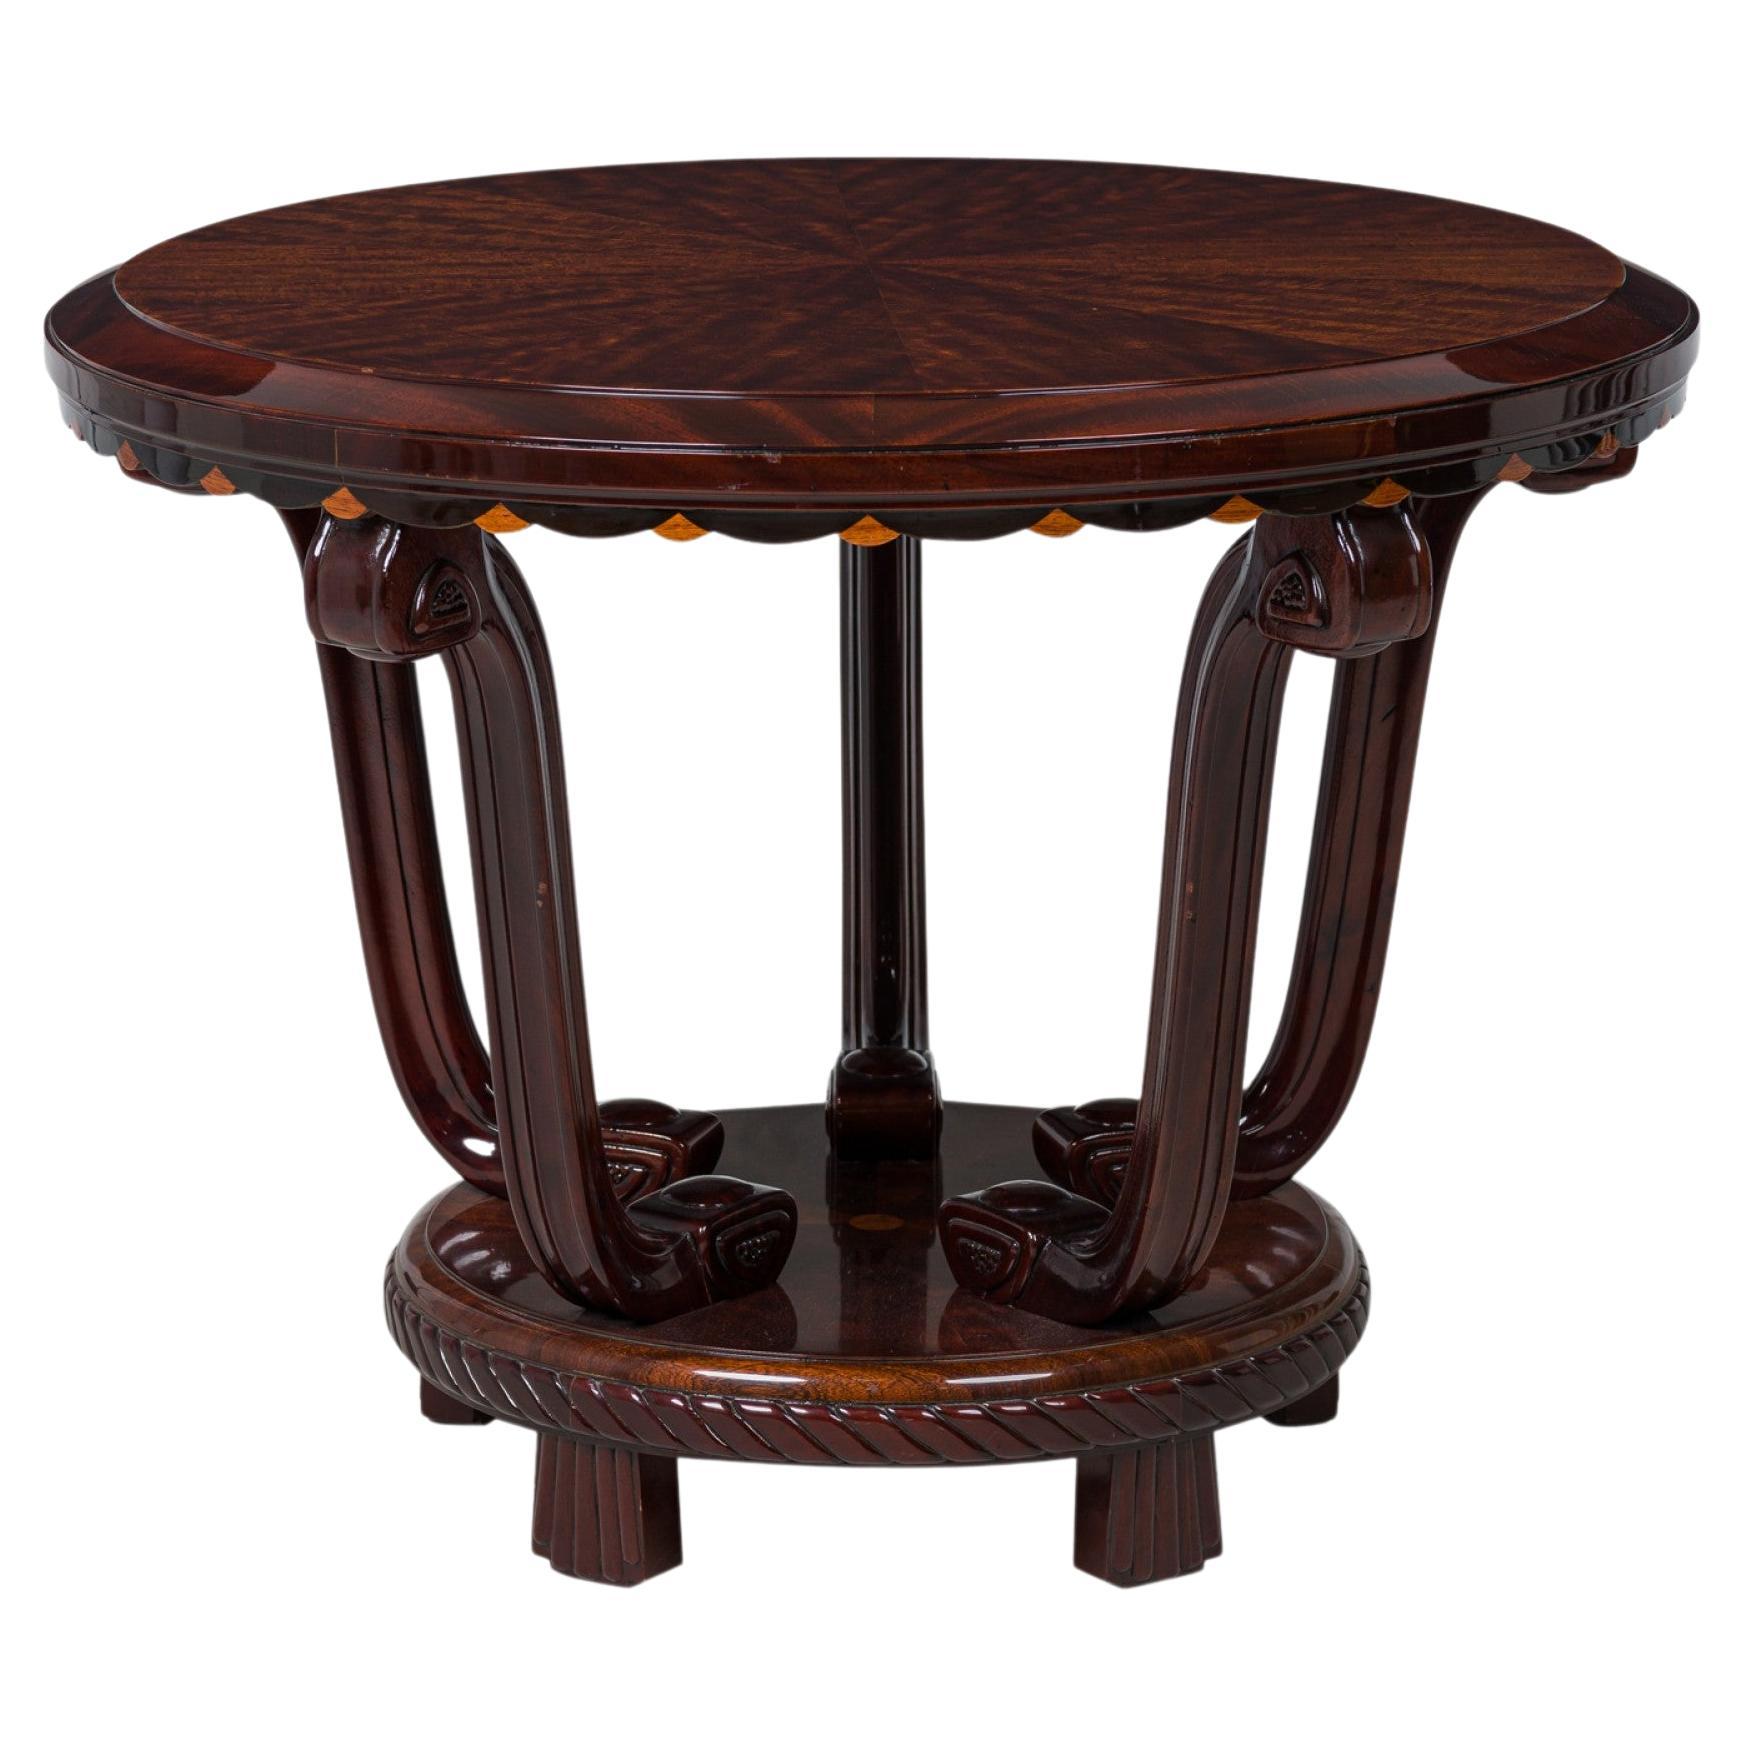 Maurice Dufrene French Late Art Deco Palisander Inlaid Center / Side Table